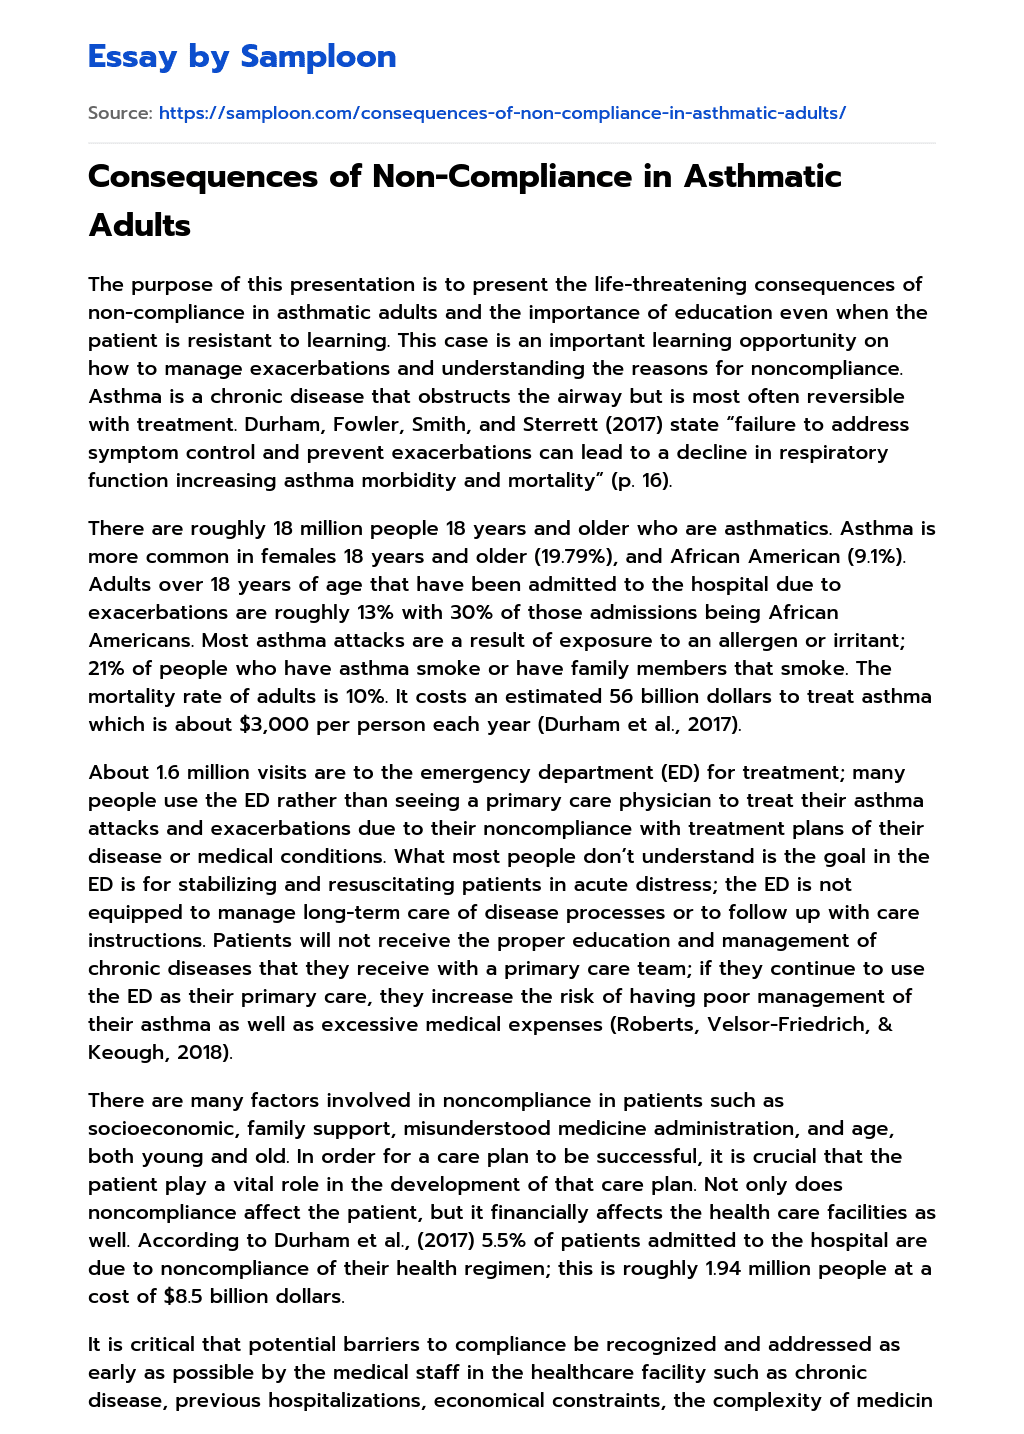 Consequences of Non-Compliance in Asthmatic Adults essay